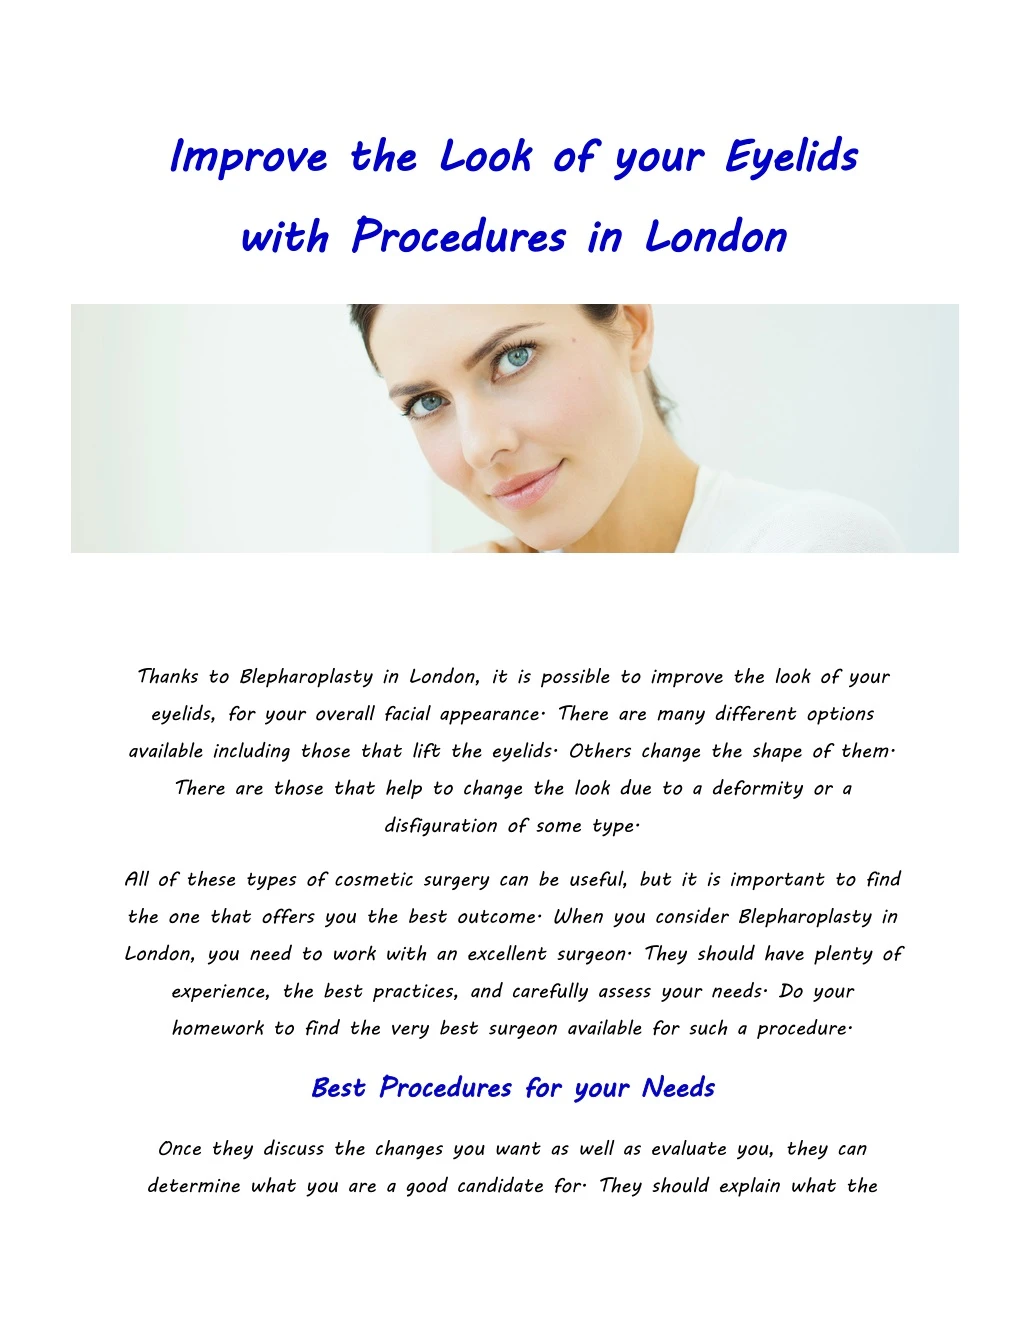 improve the look of your eyelids with procedures